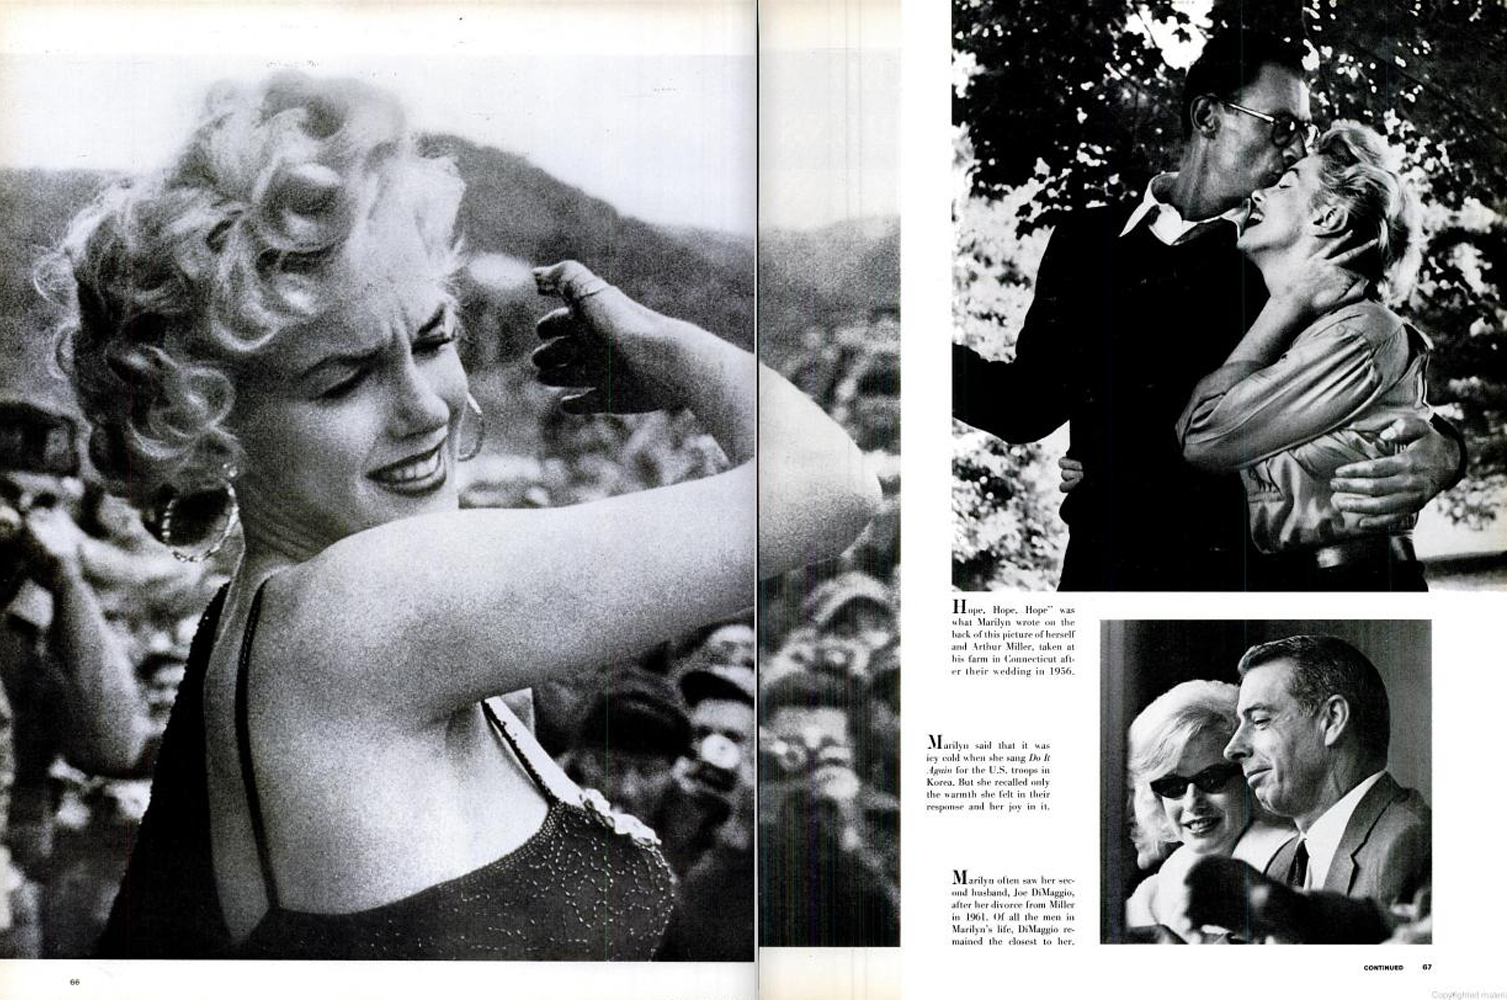 Page spreads from the August 17, 1962, issue of LIFE Magazine.